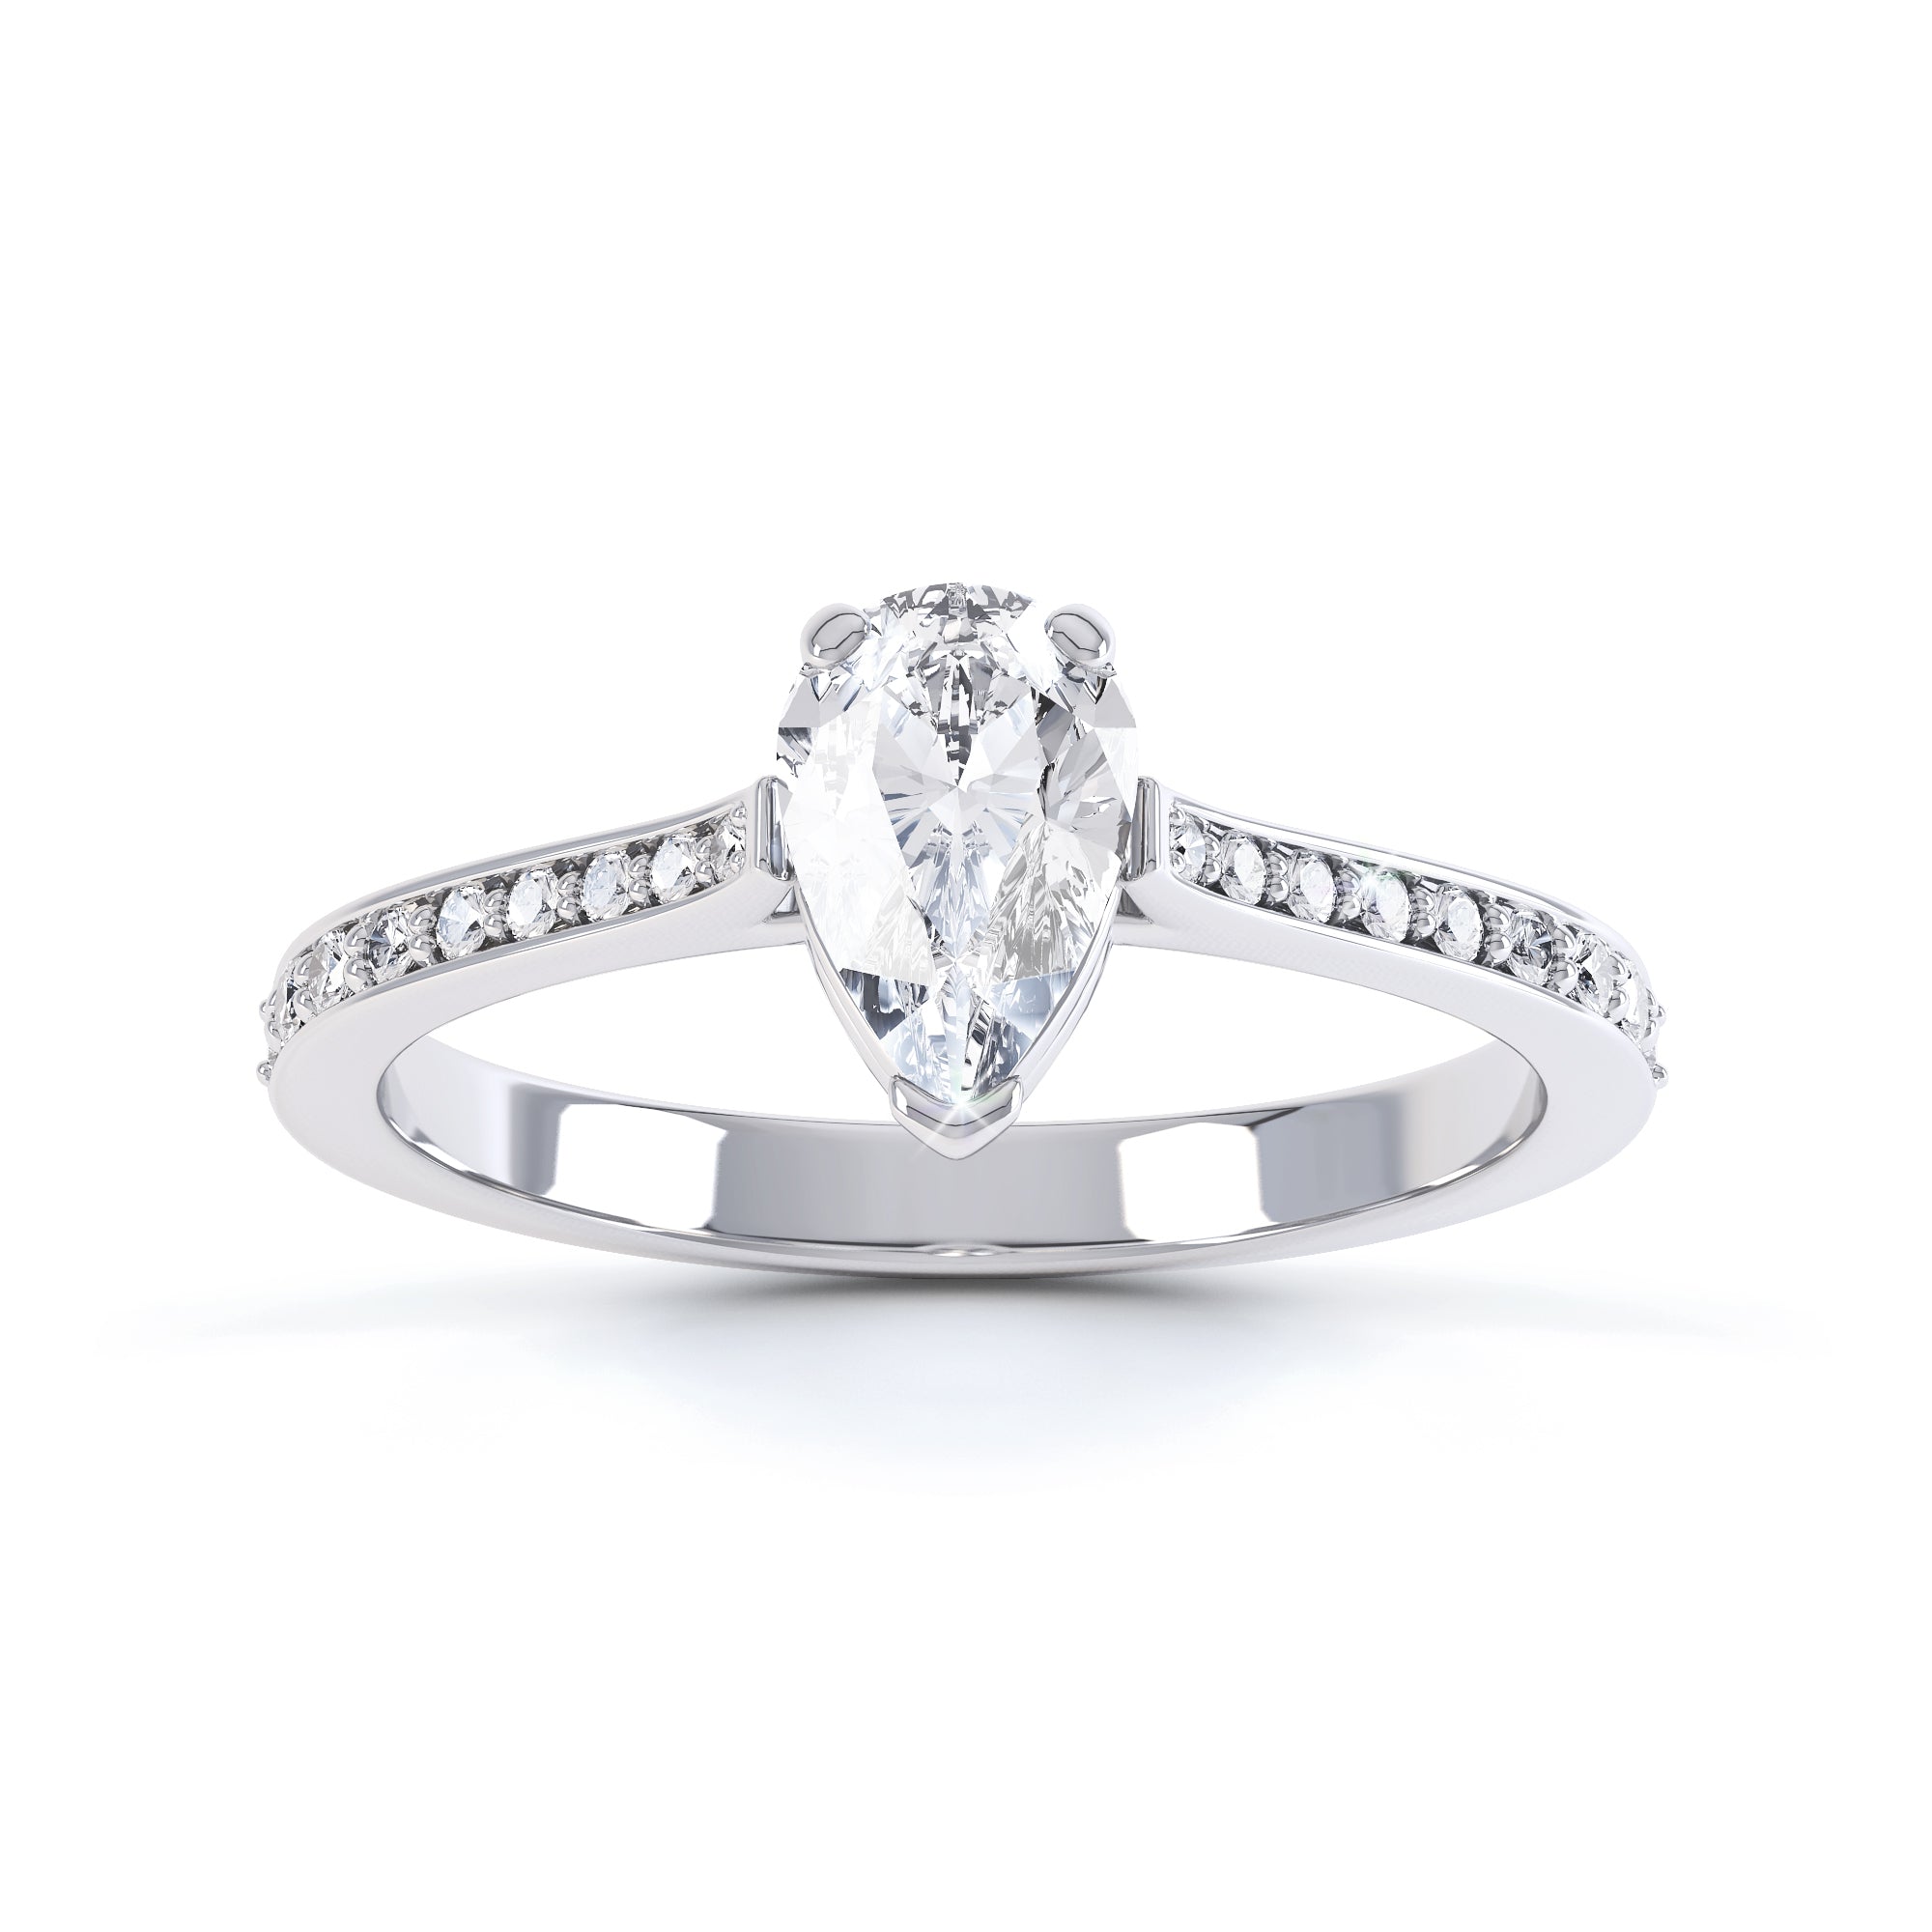 Diamond Engagement Ring- Pear Shaped, 3 V claws, Channel and grain Set Shoulders